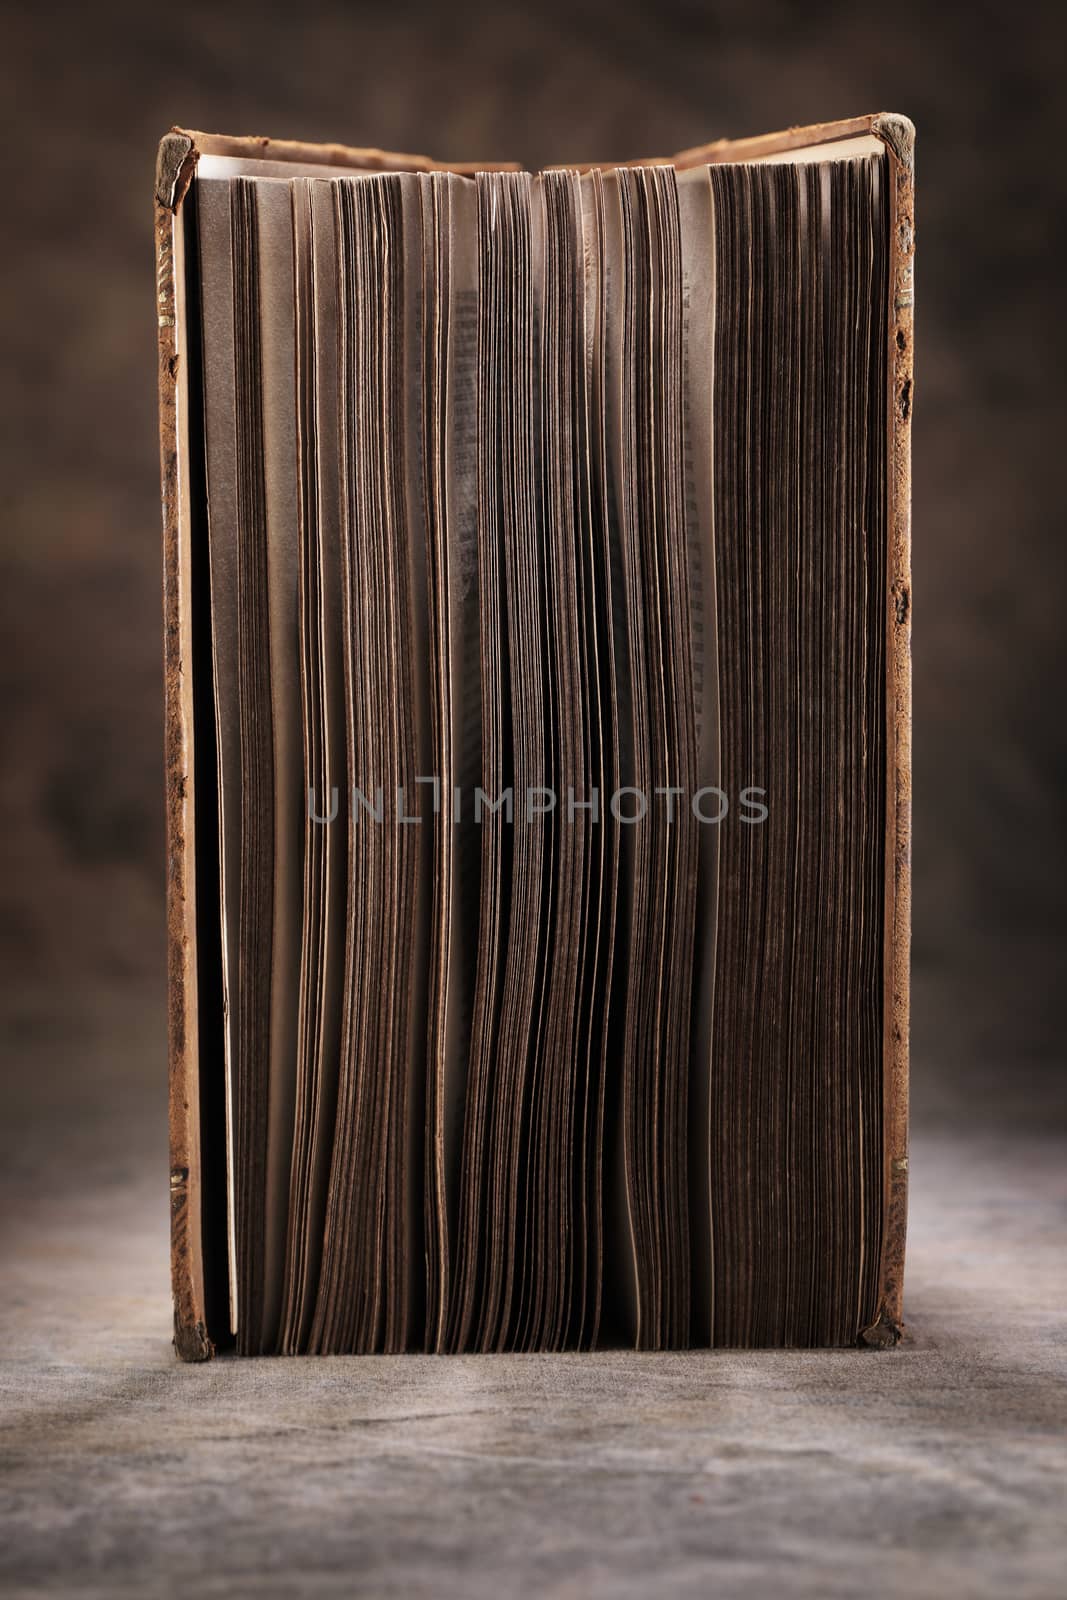 Old Book by Stocksnapper